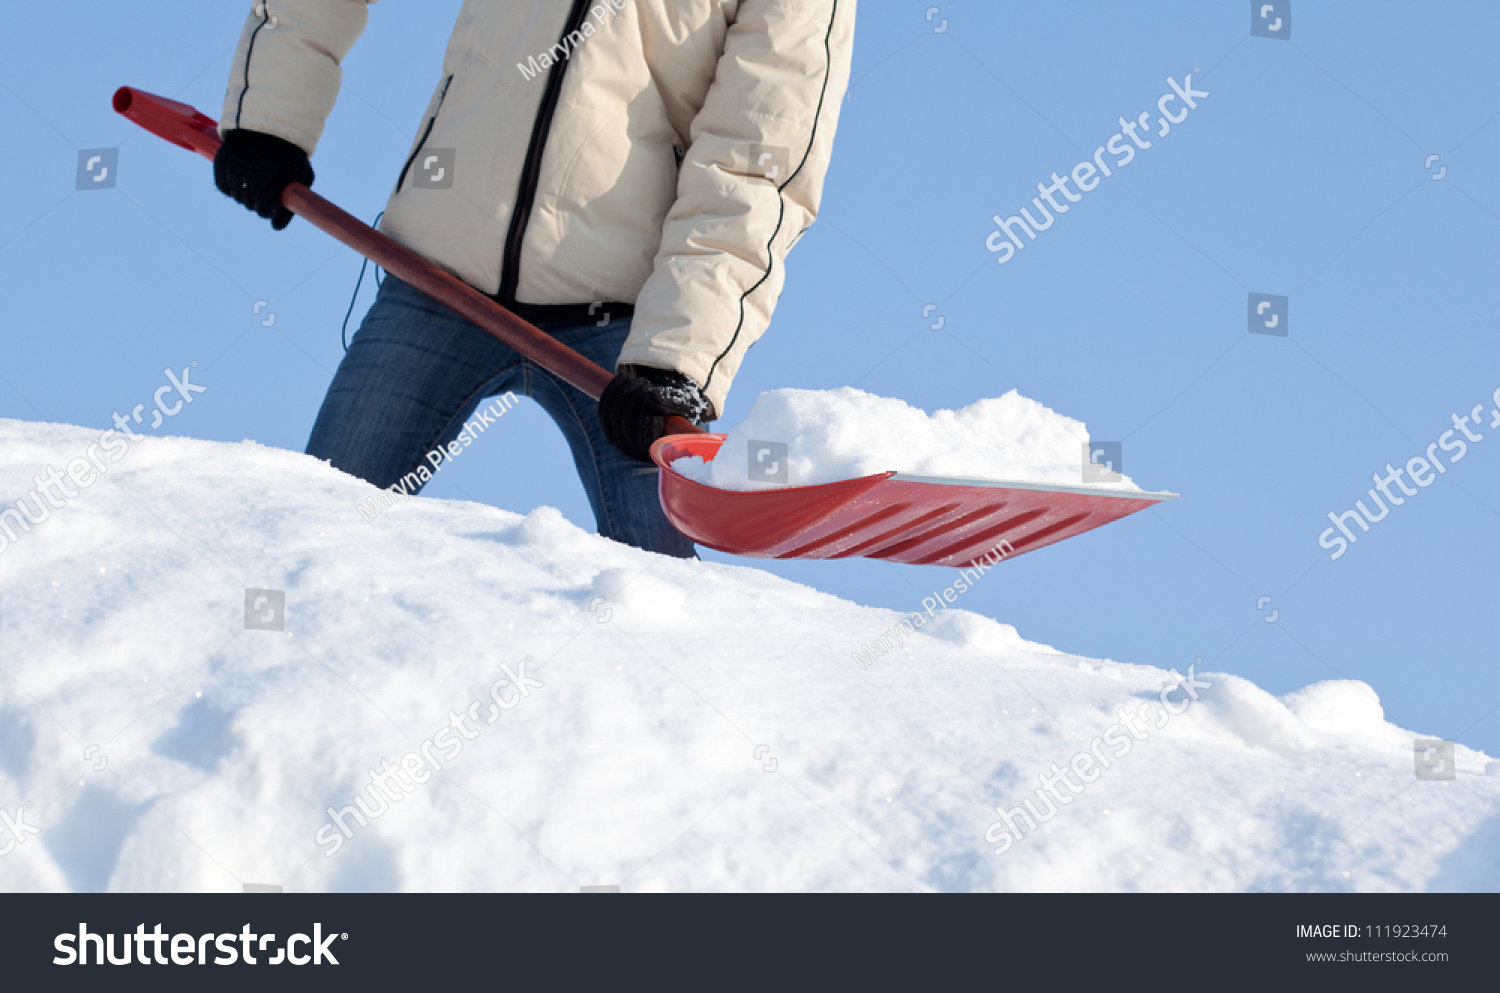 stock-photo-removing-snow-with-a-shovel-after-snowfall-111923474.jpg